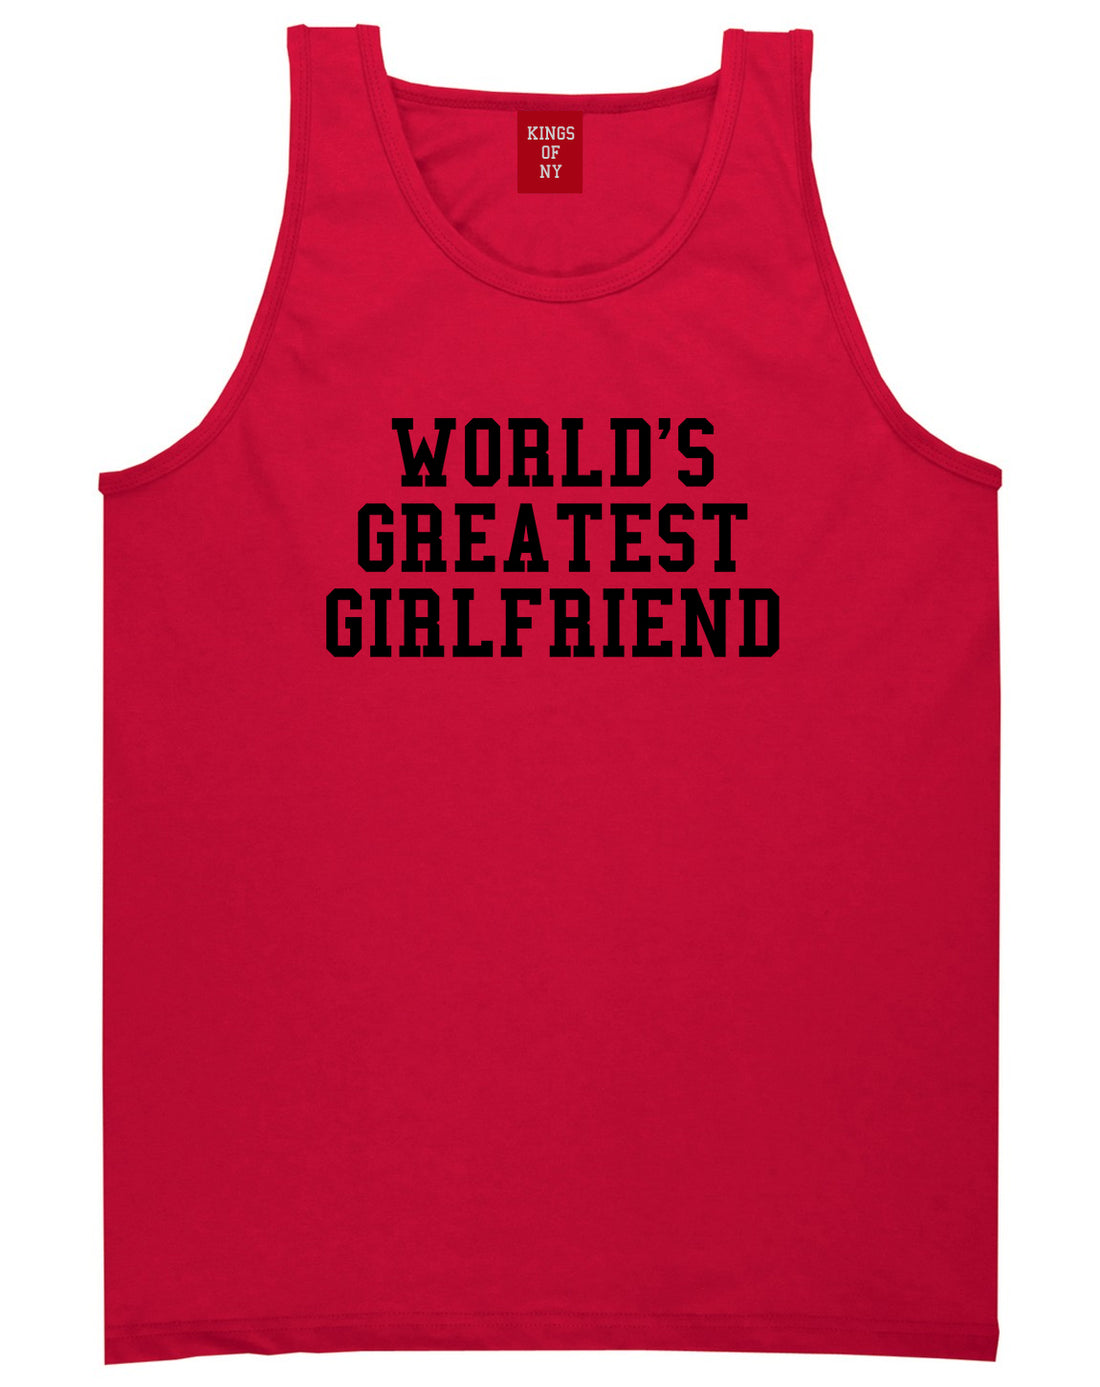 Worlds Greatest Girlfriend Funny Birthday Gift Mens Tank Top T-Shirt Red